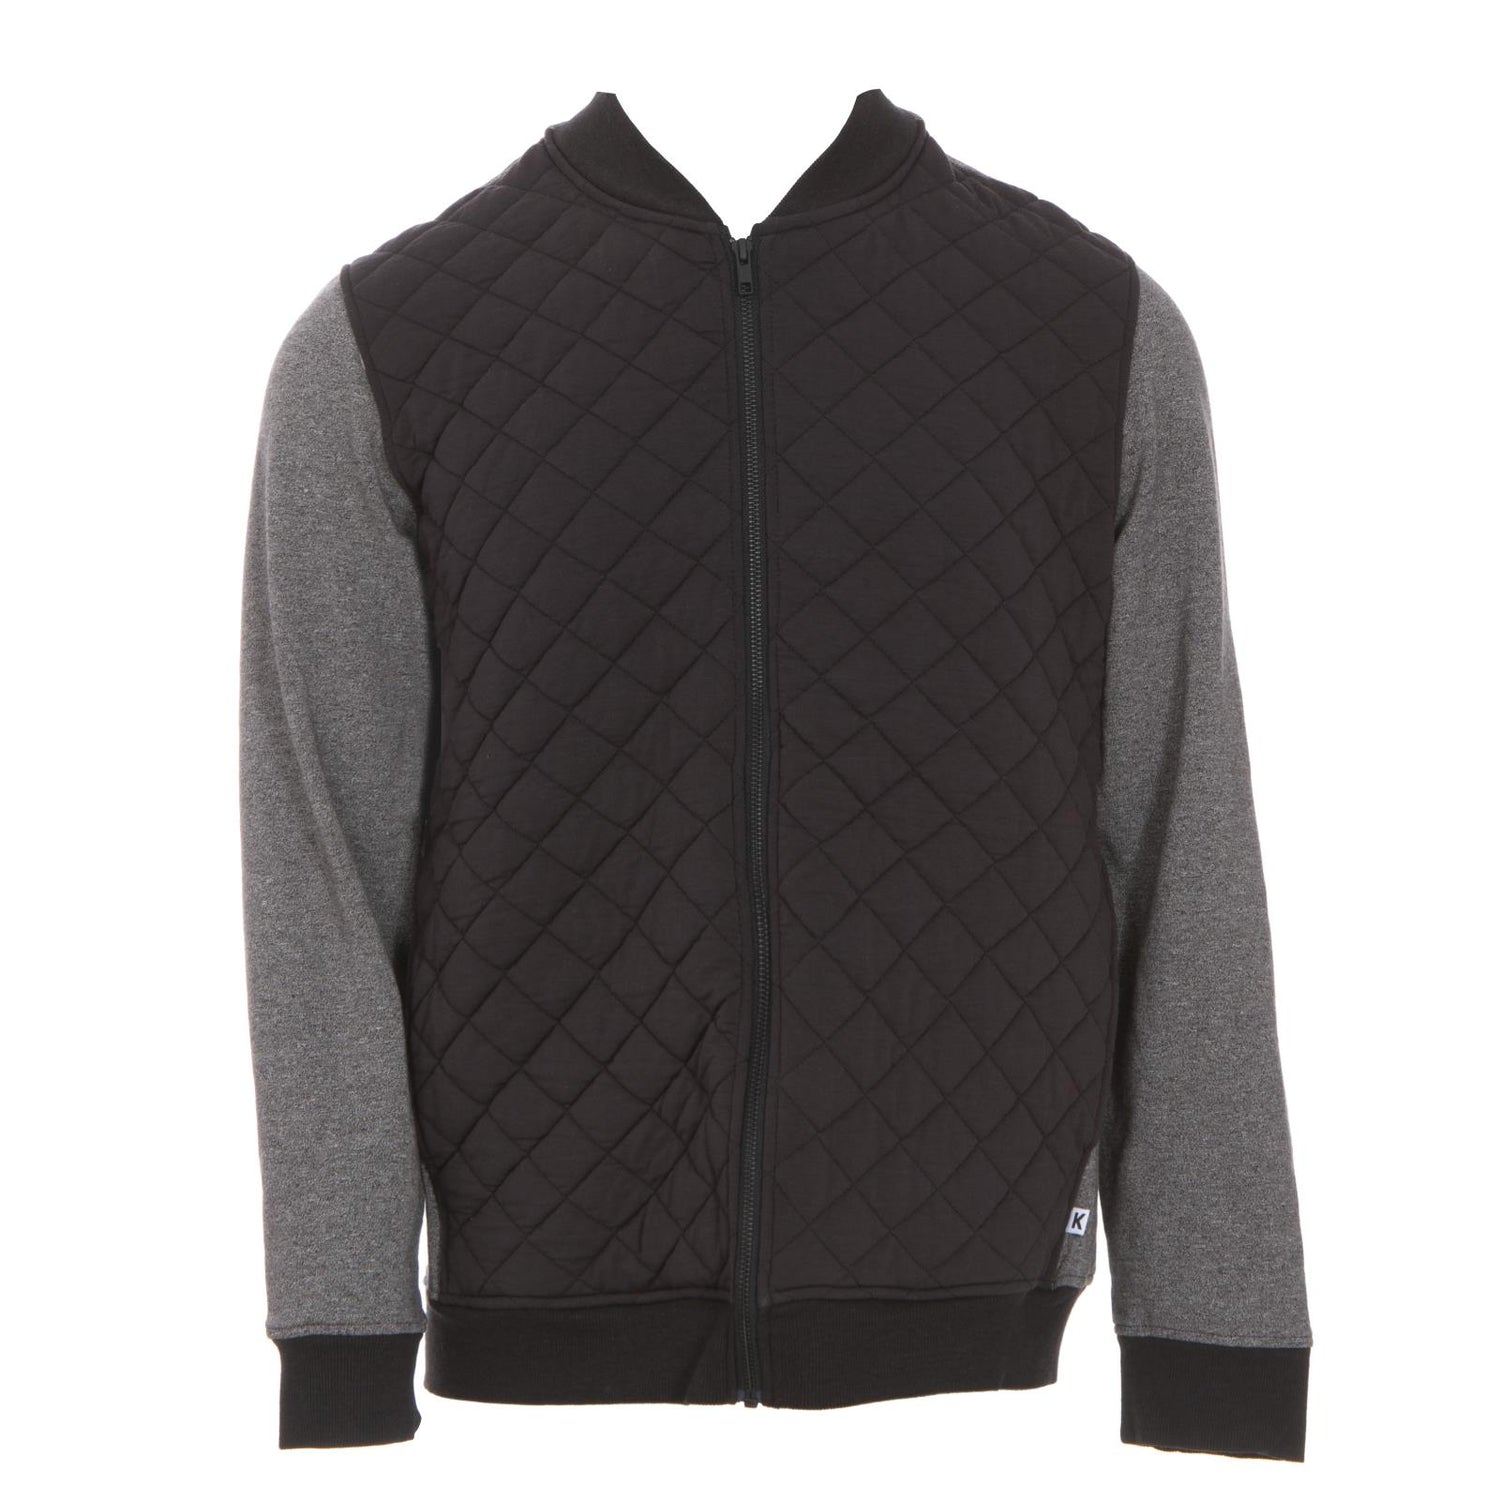 Men's Quilted Jacket in Stone/Heathered Zebra